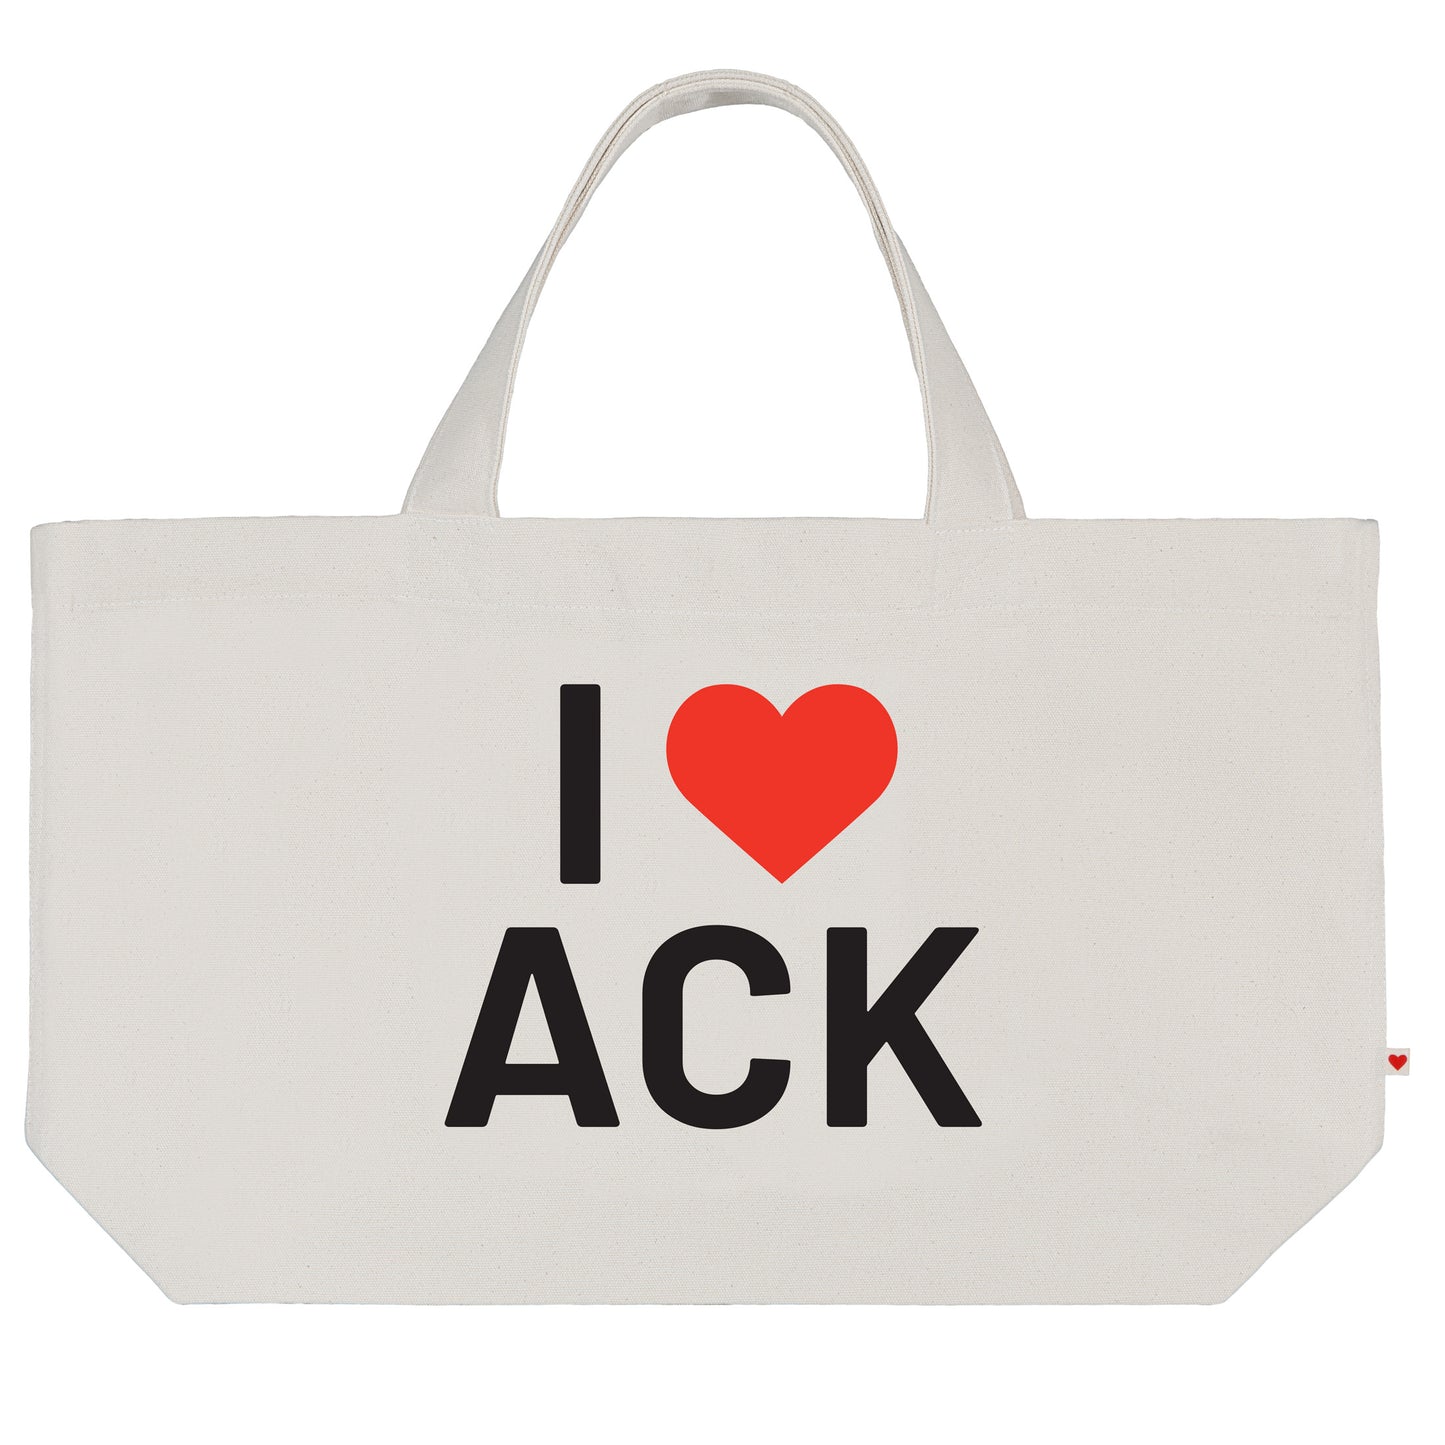 I HEART ACK CANVAS TOTE  - RED heart